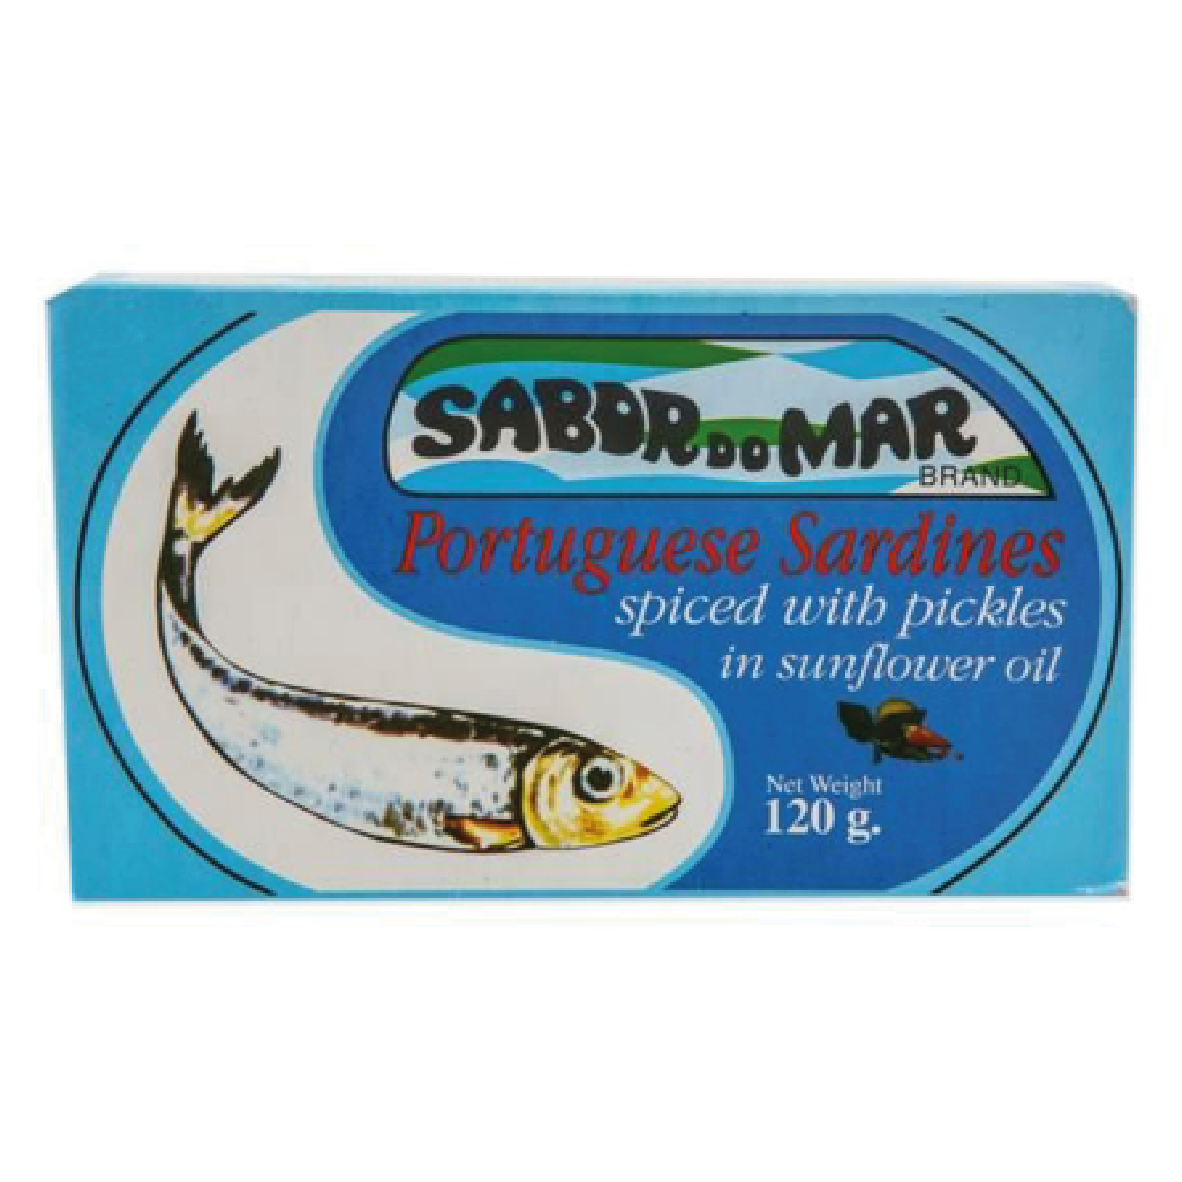 Sabor Do Mar Portuguese Sardines Spiced with Pickles in Sunflower Oil 120g